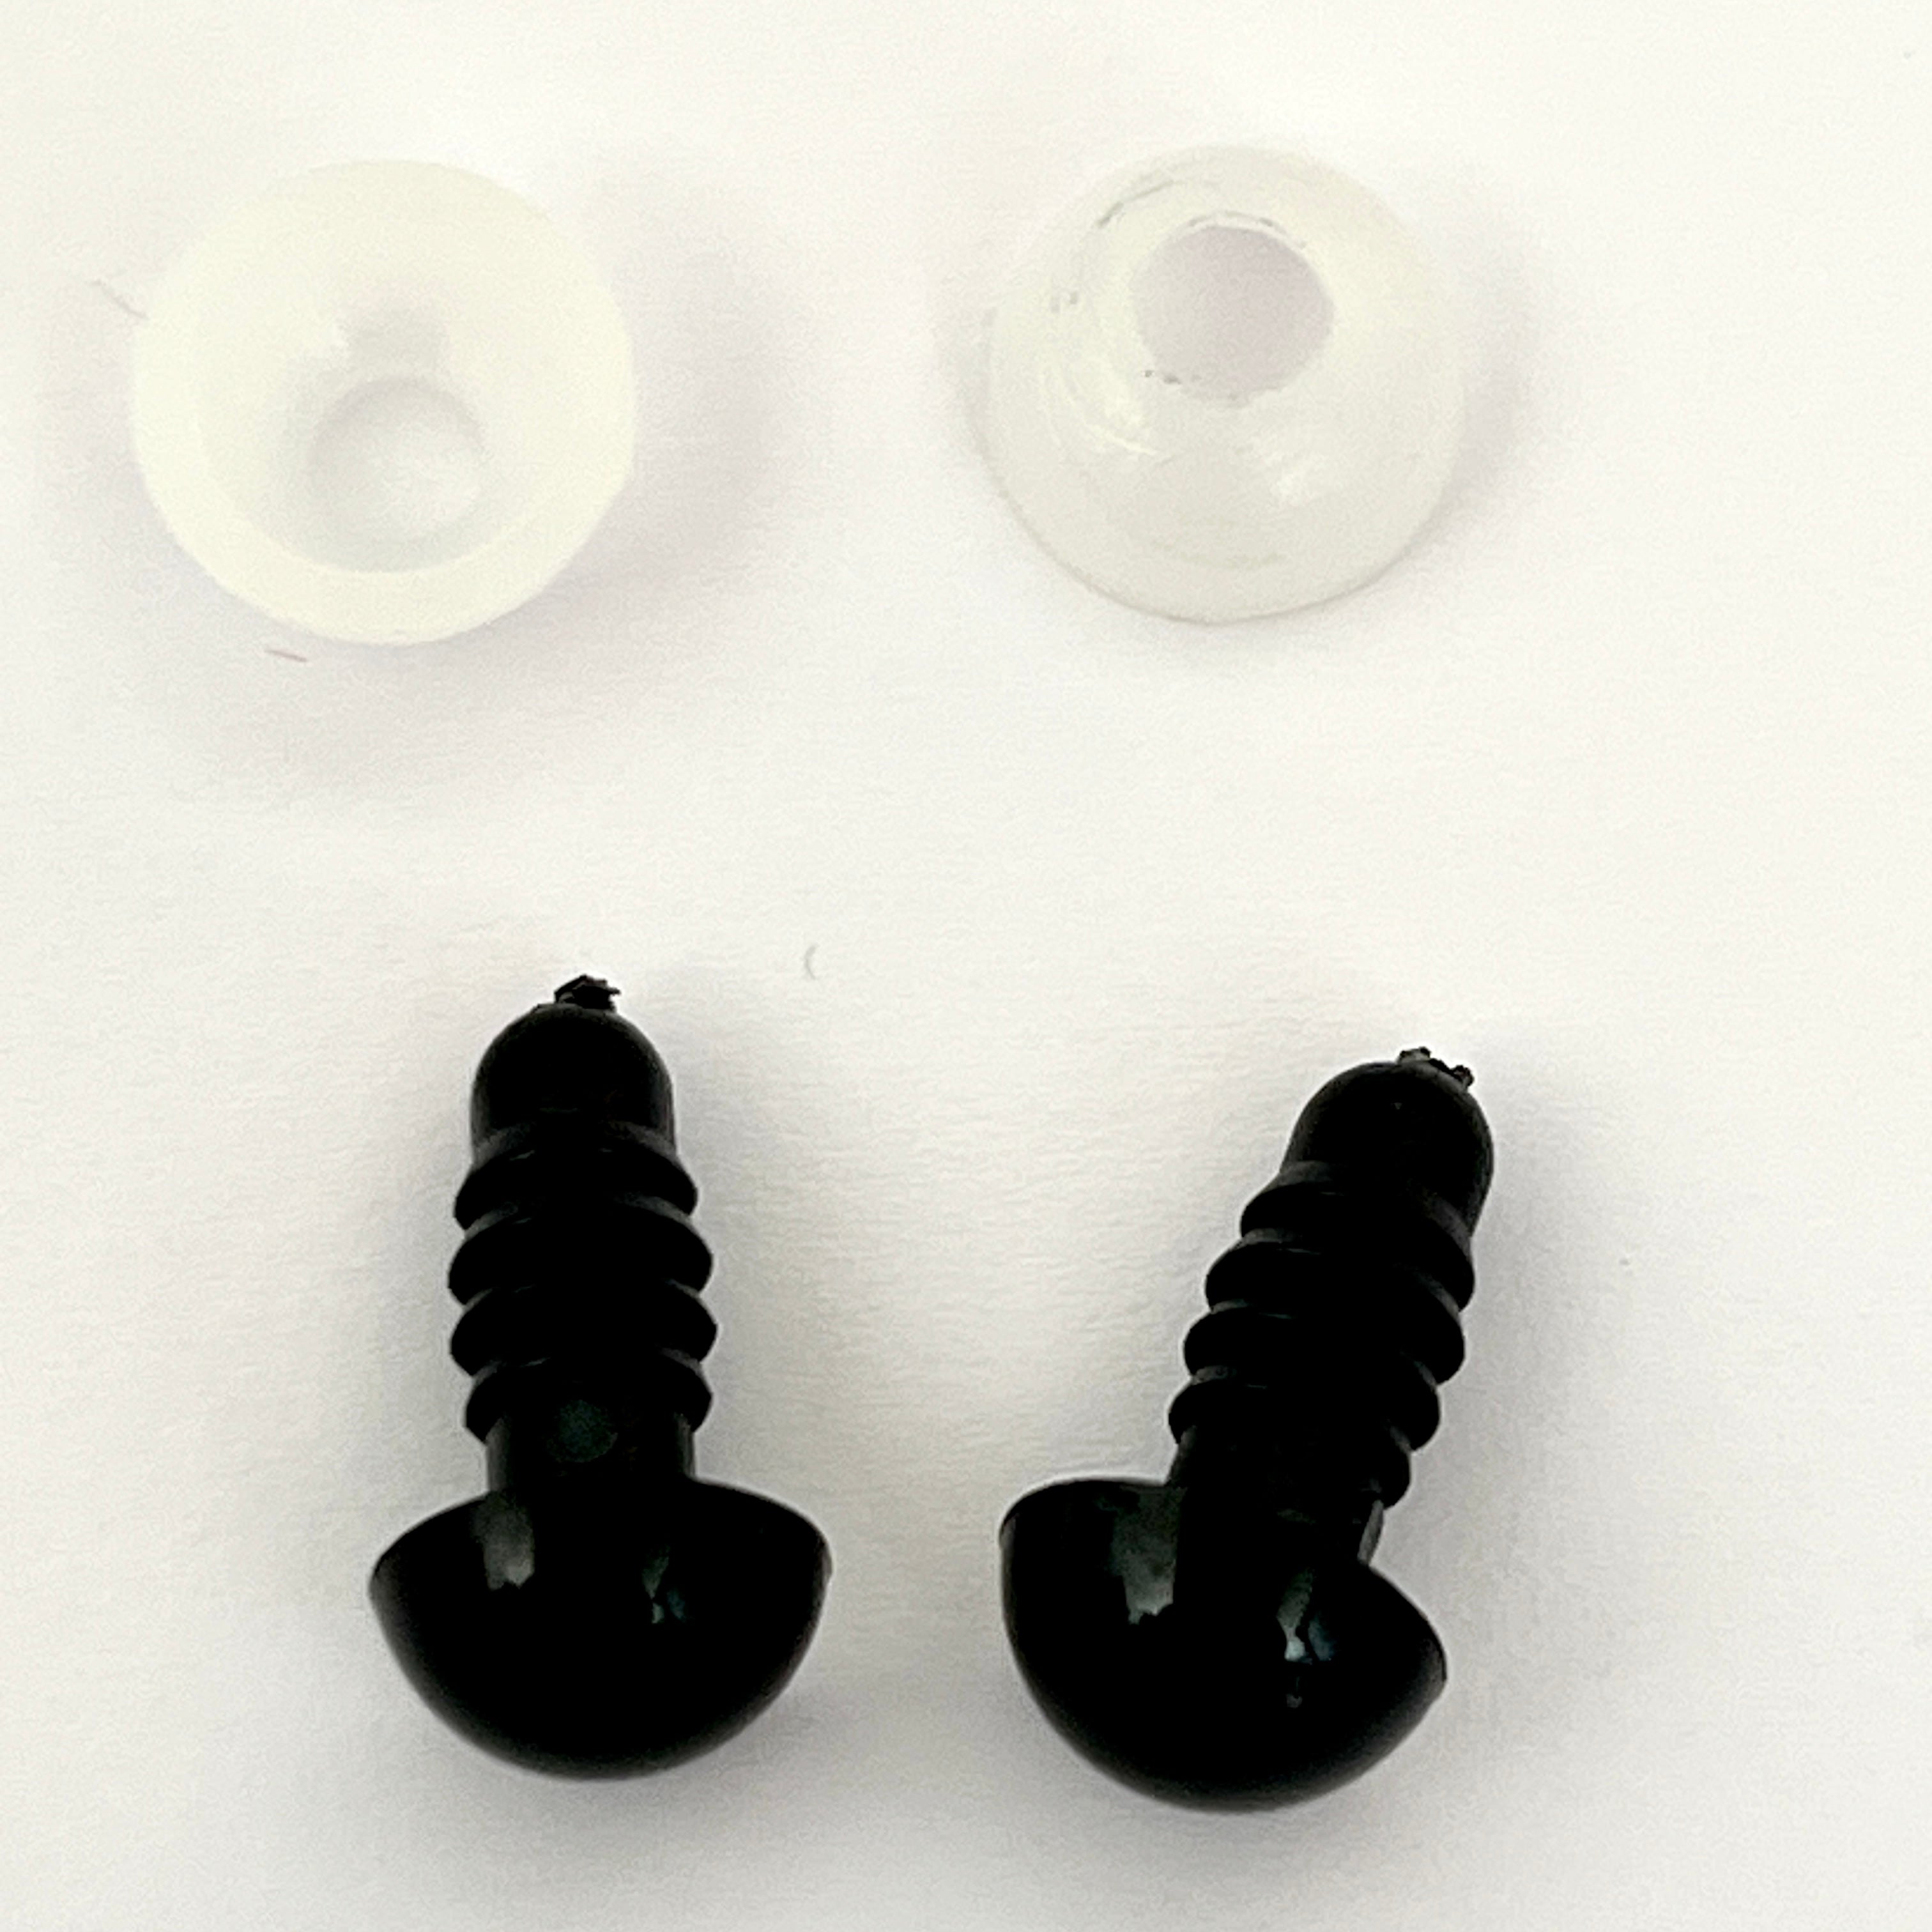 14mm Black Safety Eyes With Clamps - 100 Pieces - 50 Pairs - Toys